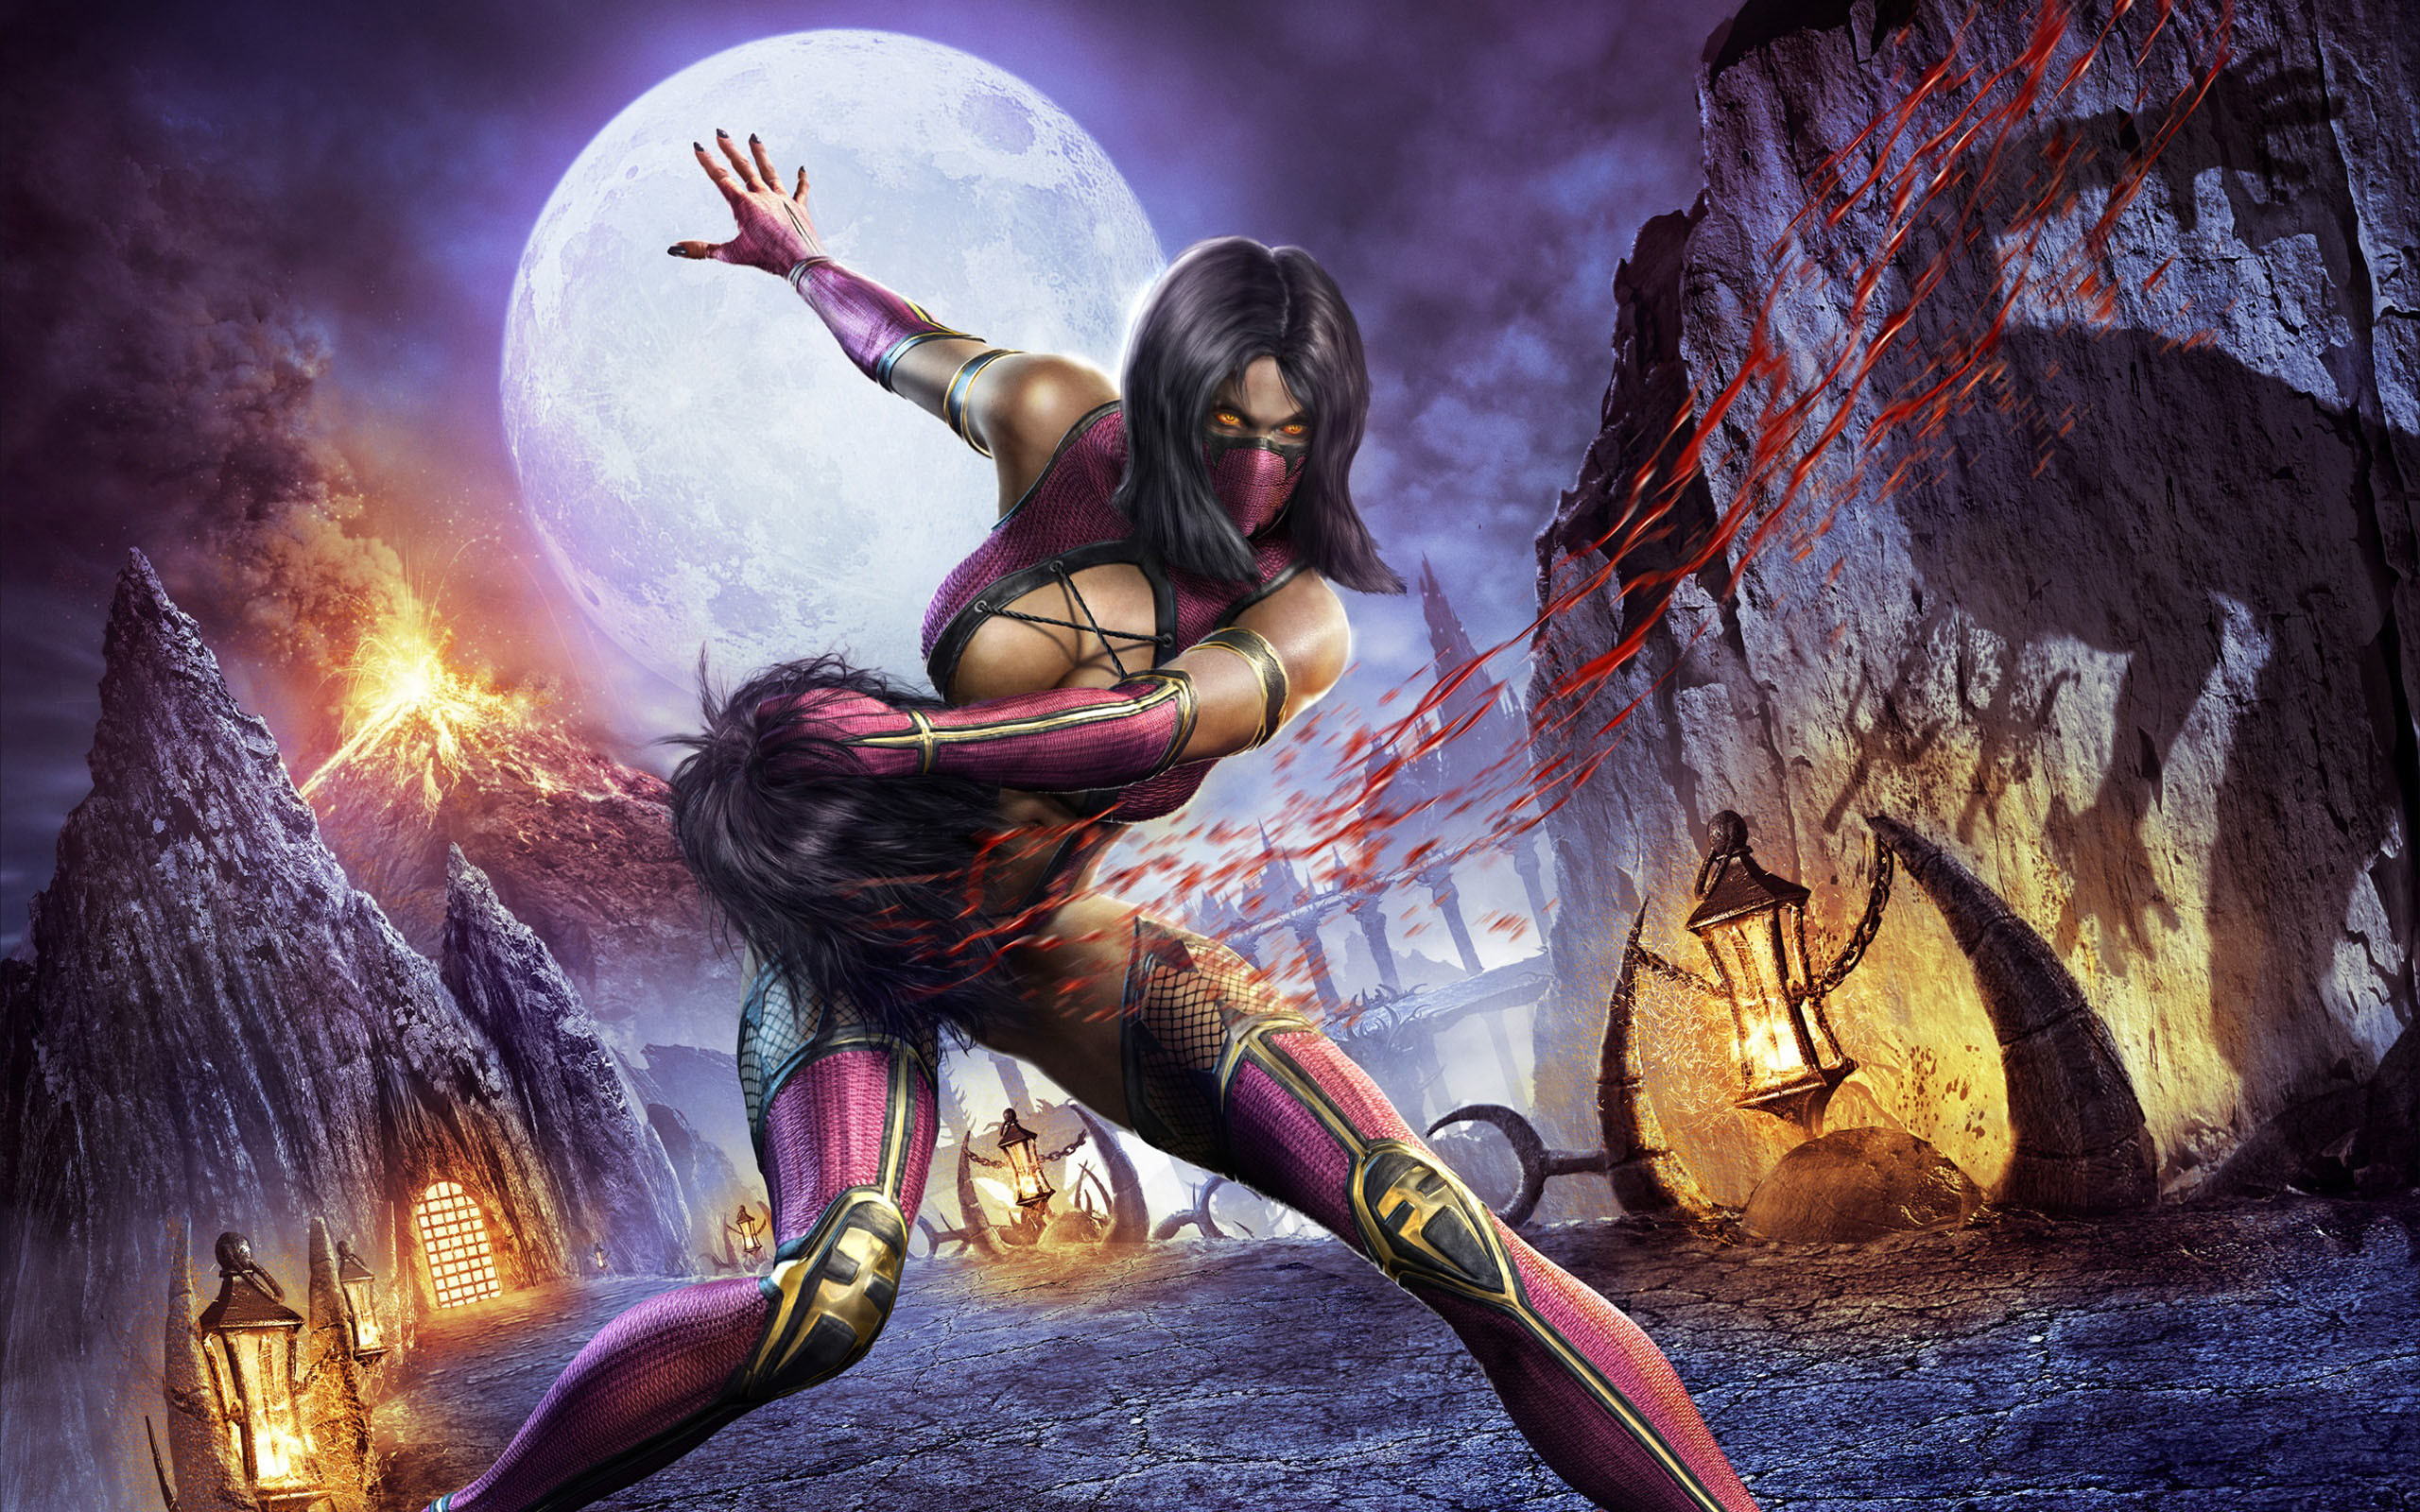 2560x1600 Free New Mortal Kombat X Mileena HD Wallpaper because theDesktop Background  Image for yourportable computer,